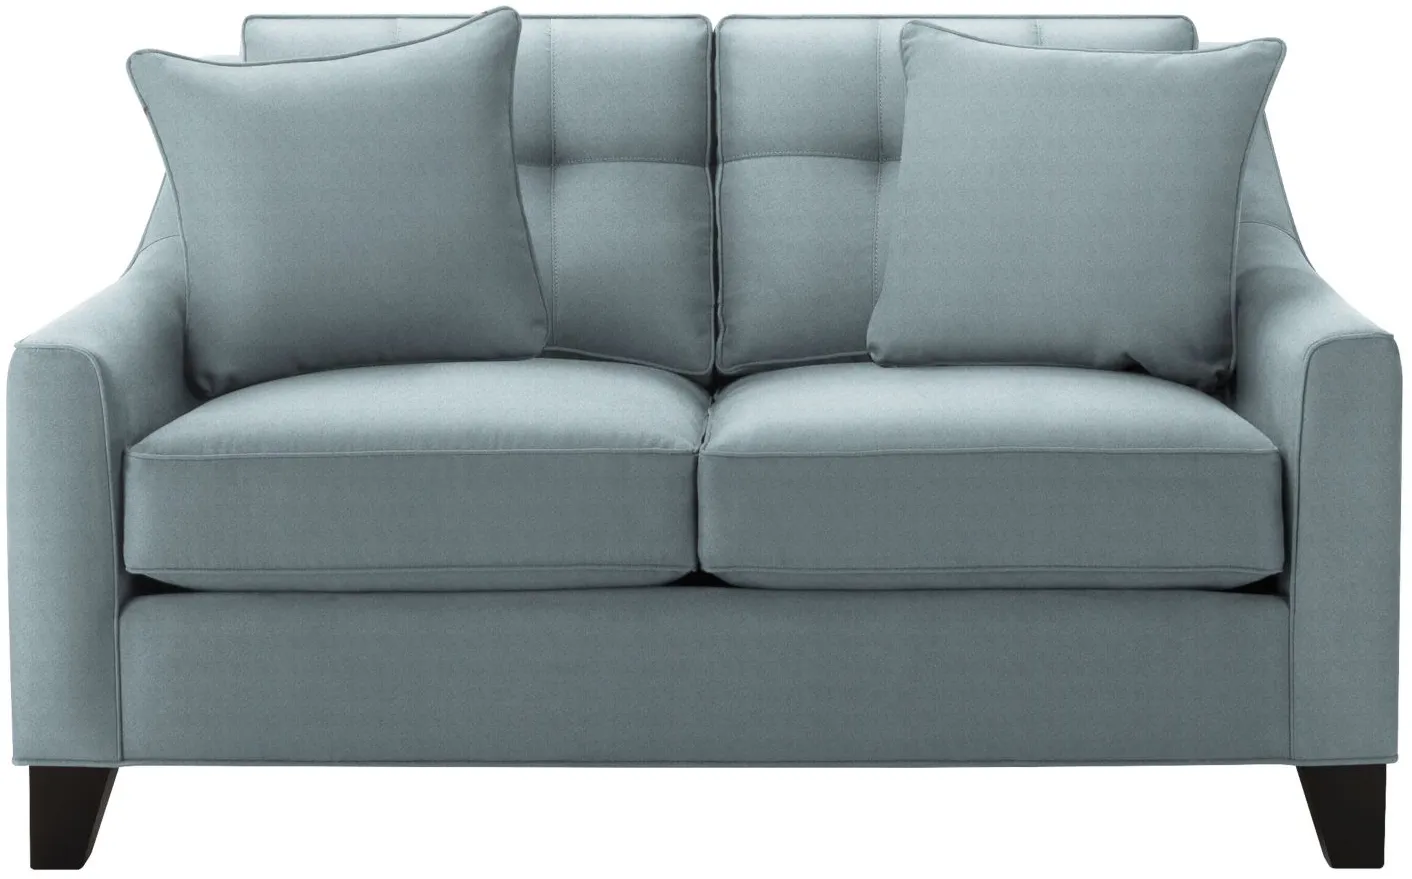 Carmine Loveseat in Suede so Soft Hydra by H.M. Richards